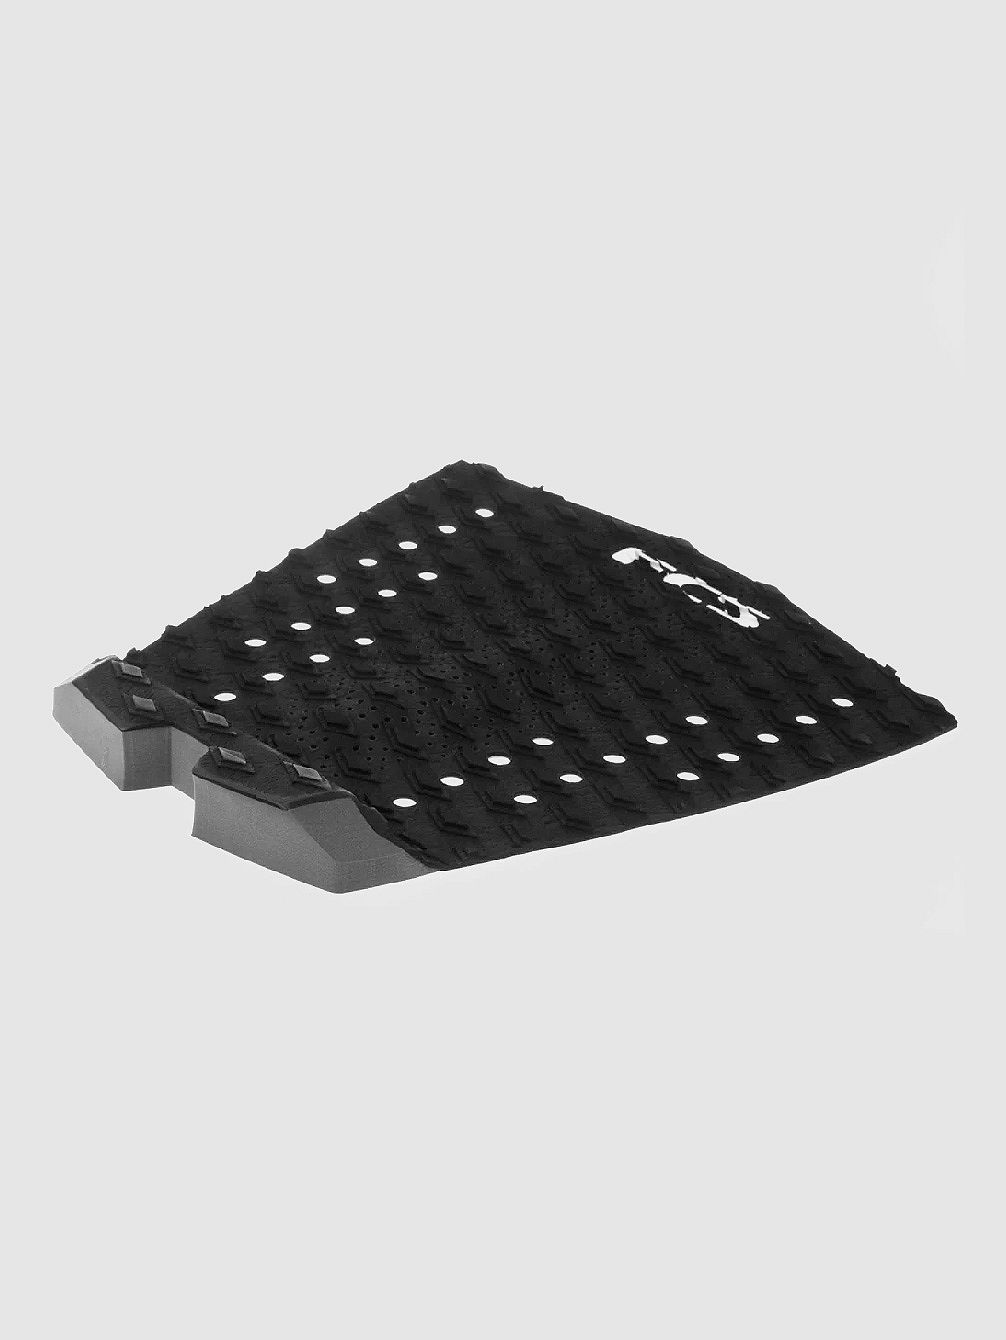 T-1 Black/Charcoal Traction Tail Pad